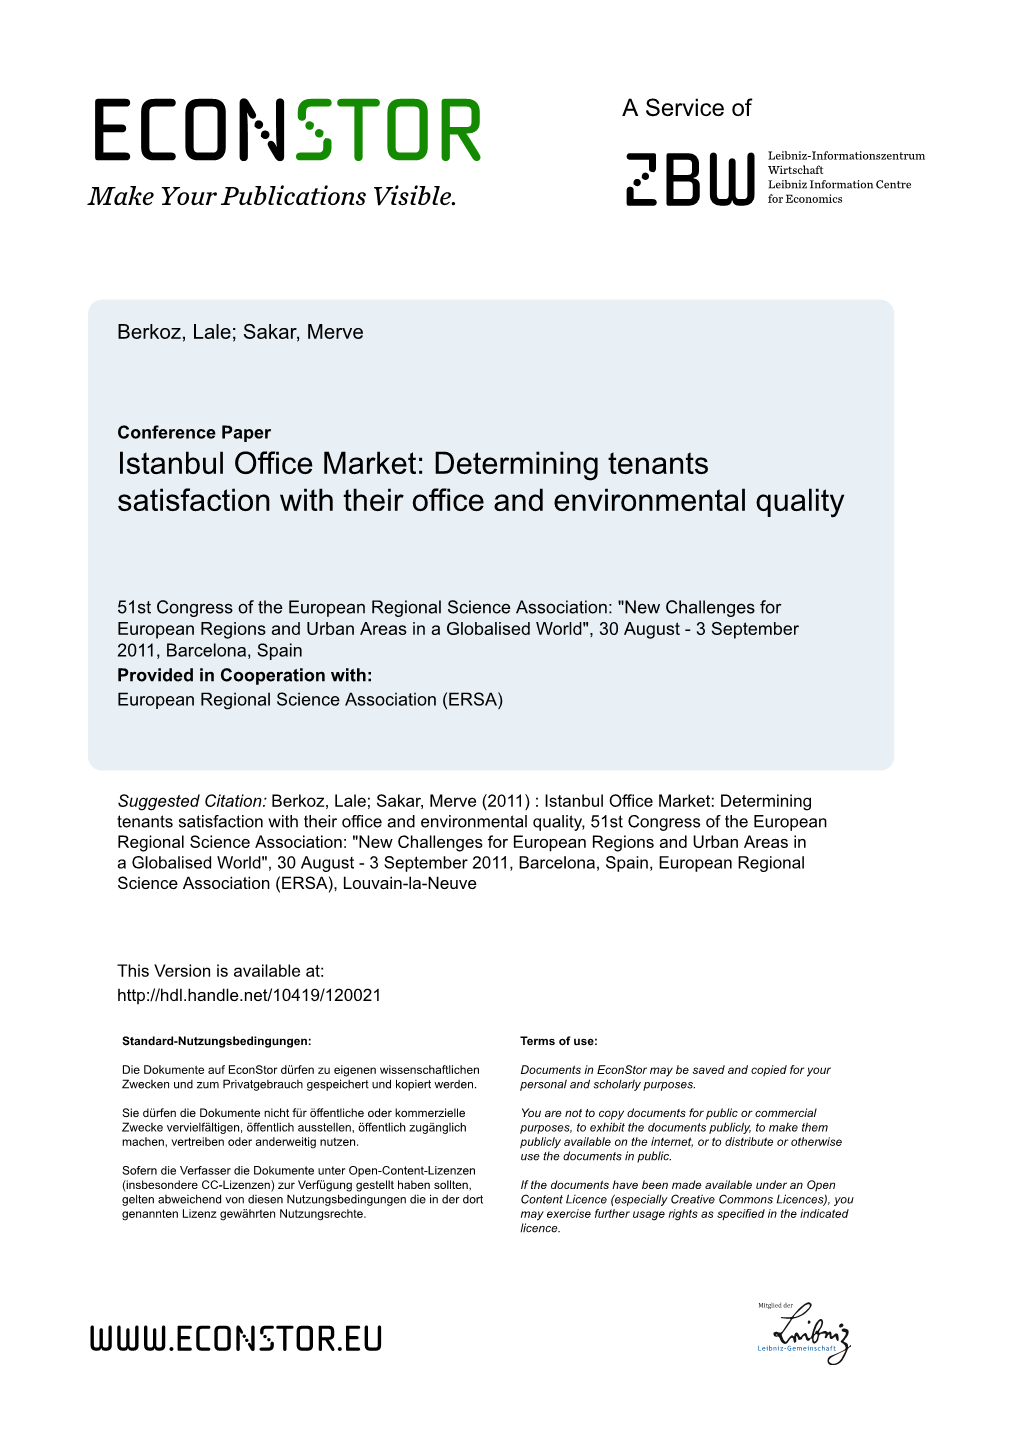 Istanbul Office Market: Determining Tenants Satisfaction with Their Office and Environmental Quality